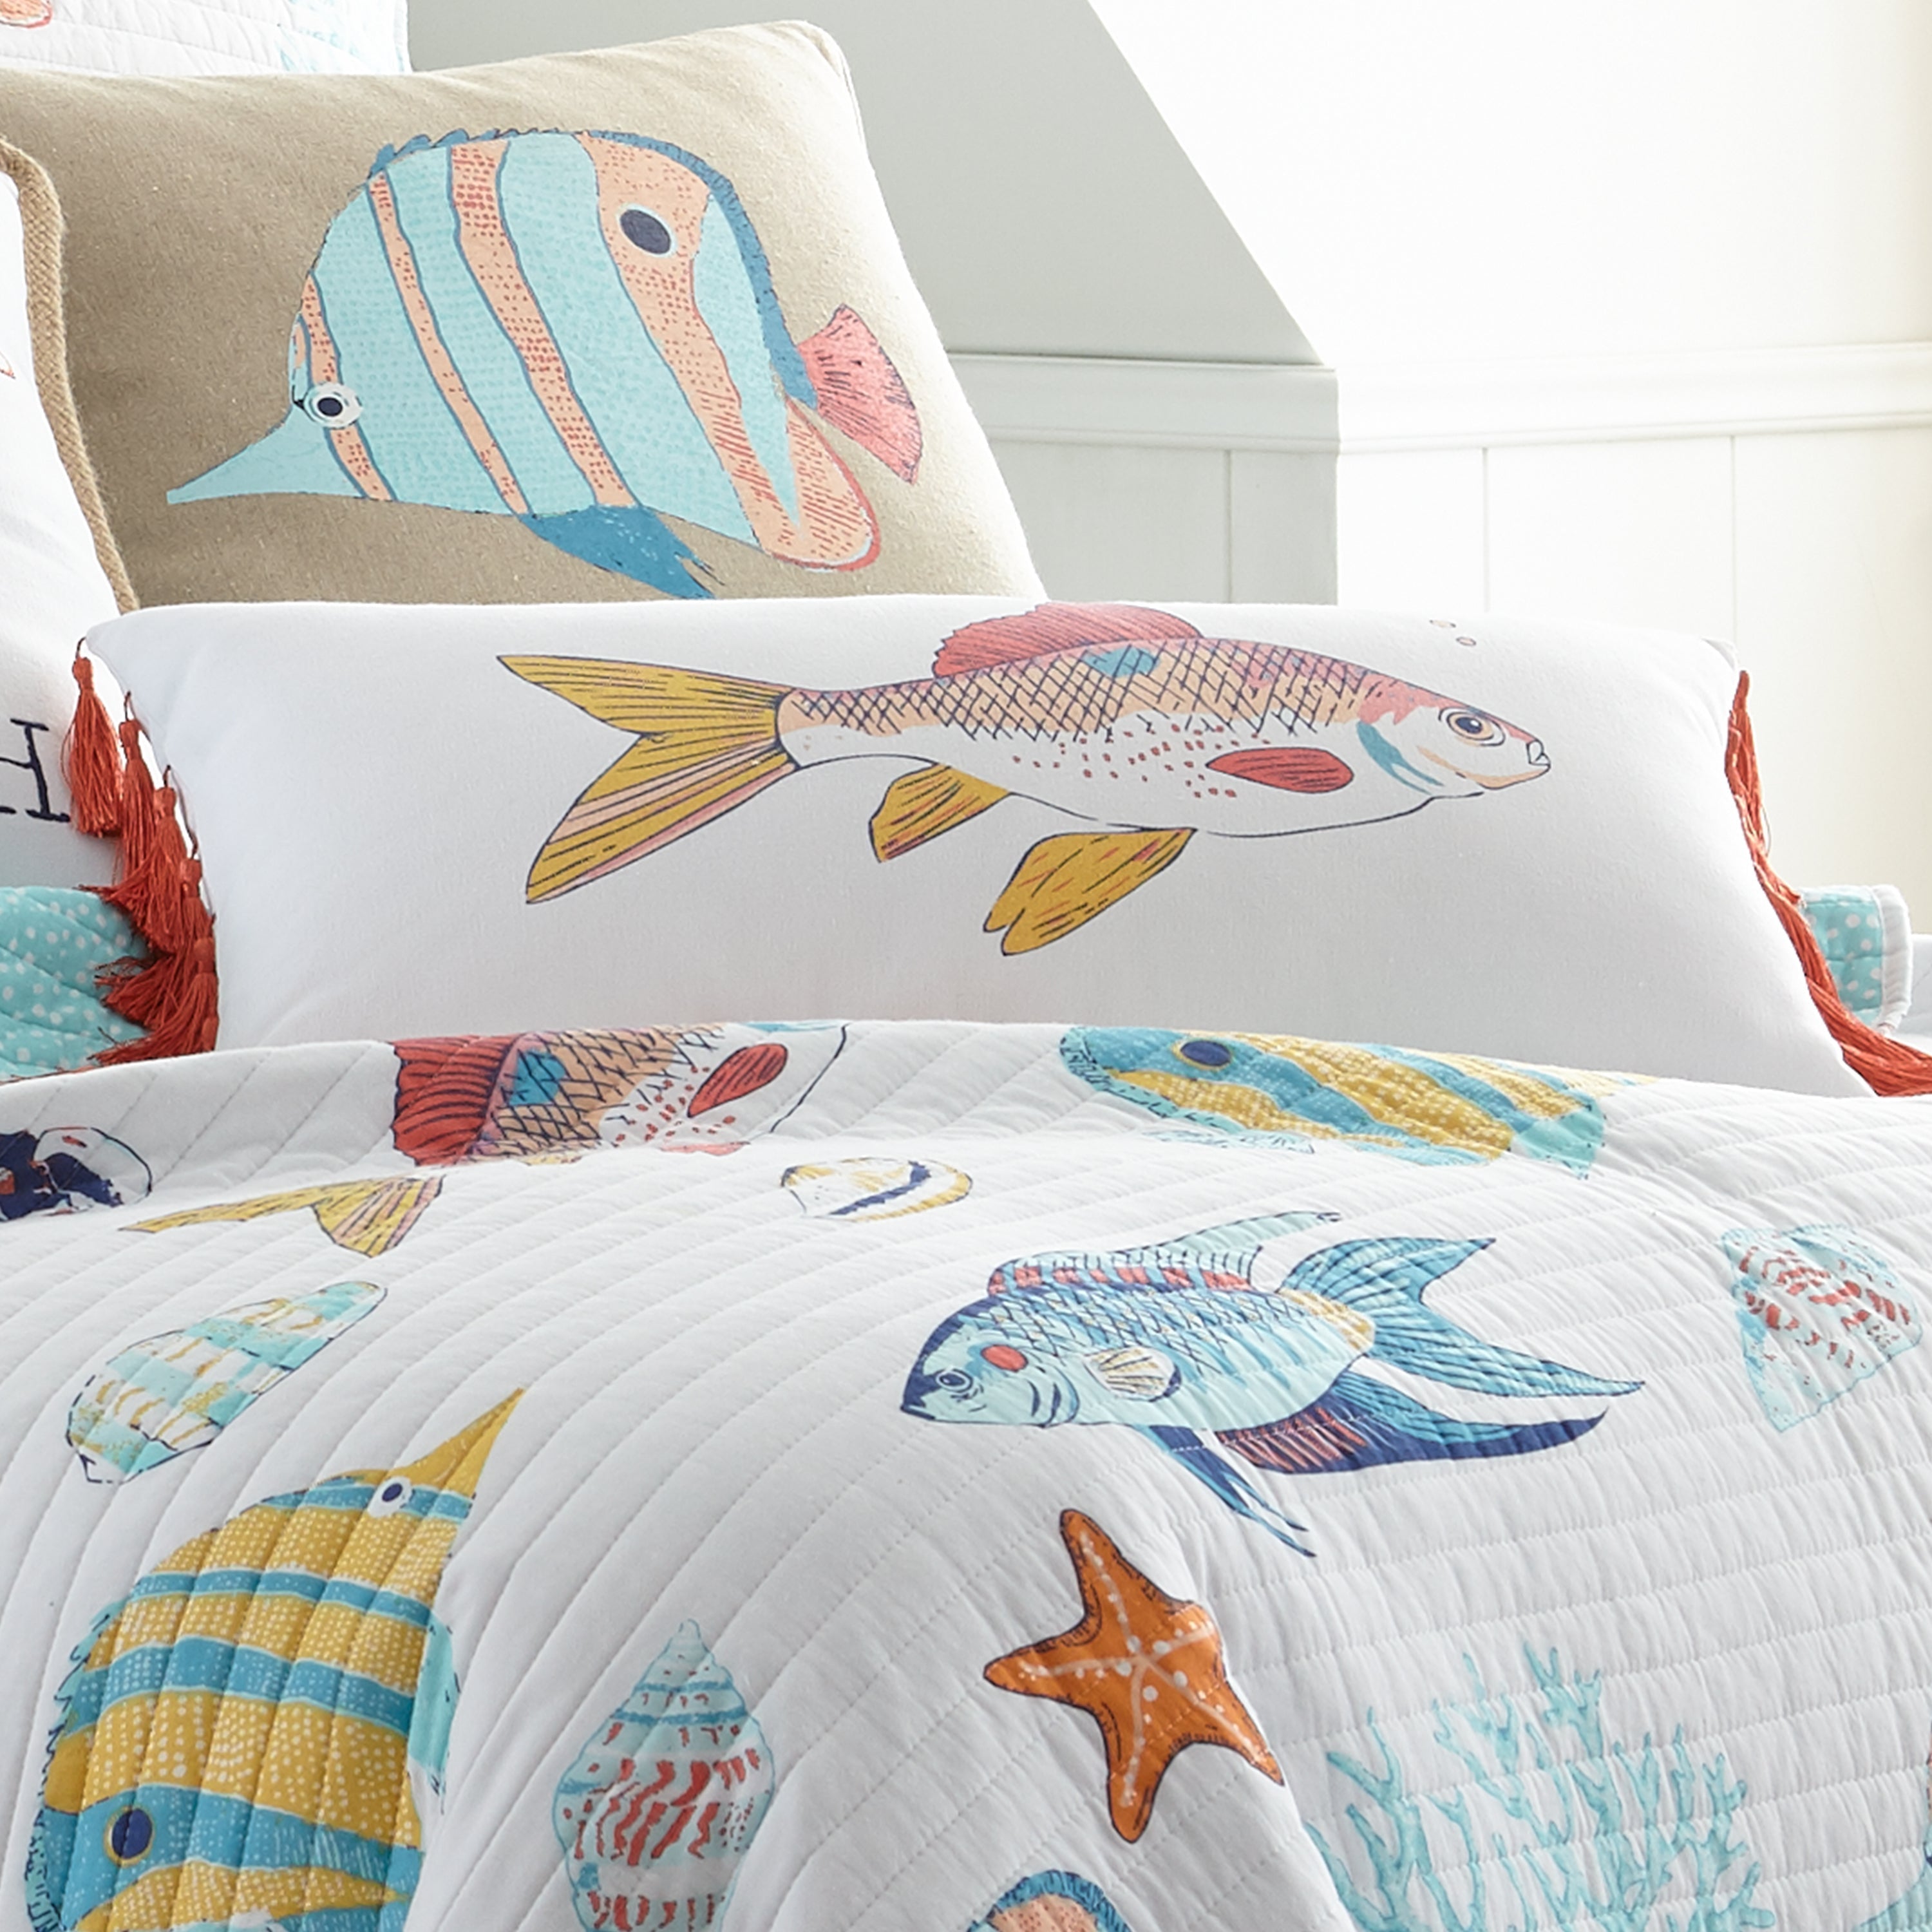 Barrier Reef Fish with Tassels Pillow